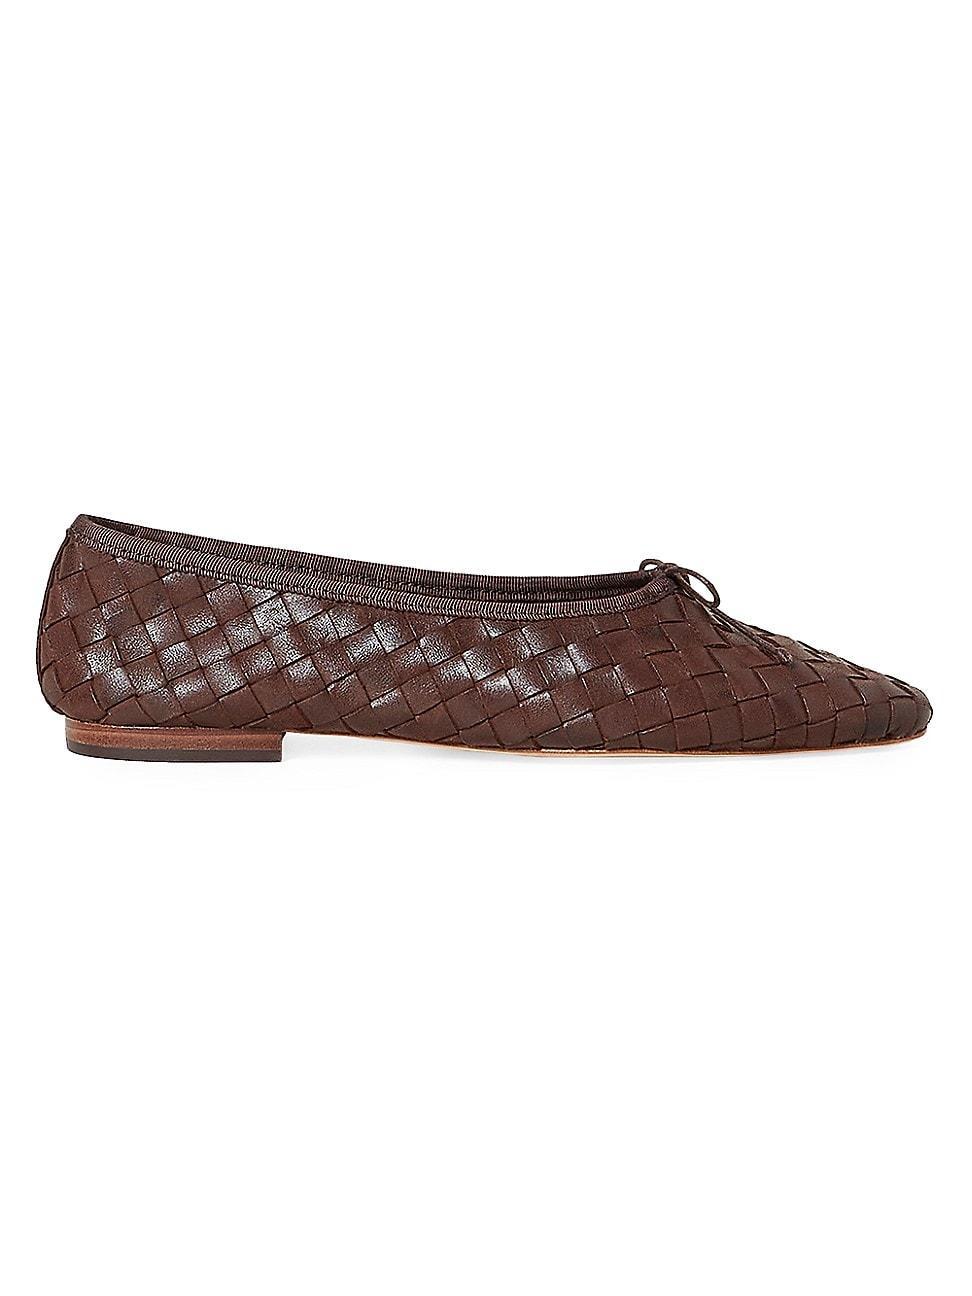 Womens Landrey Woven Leather Ballet Flats Product Image